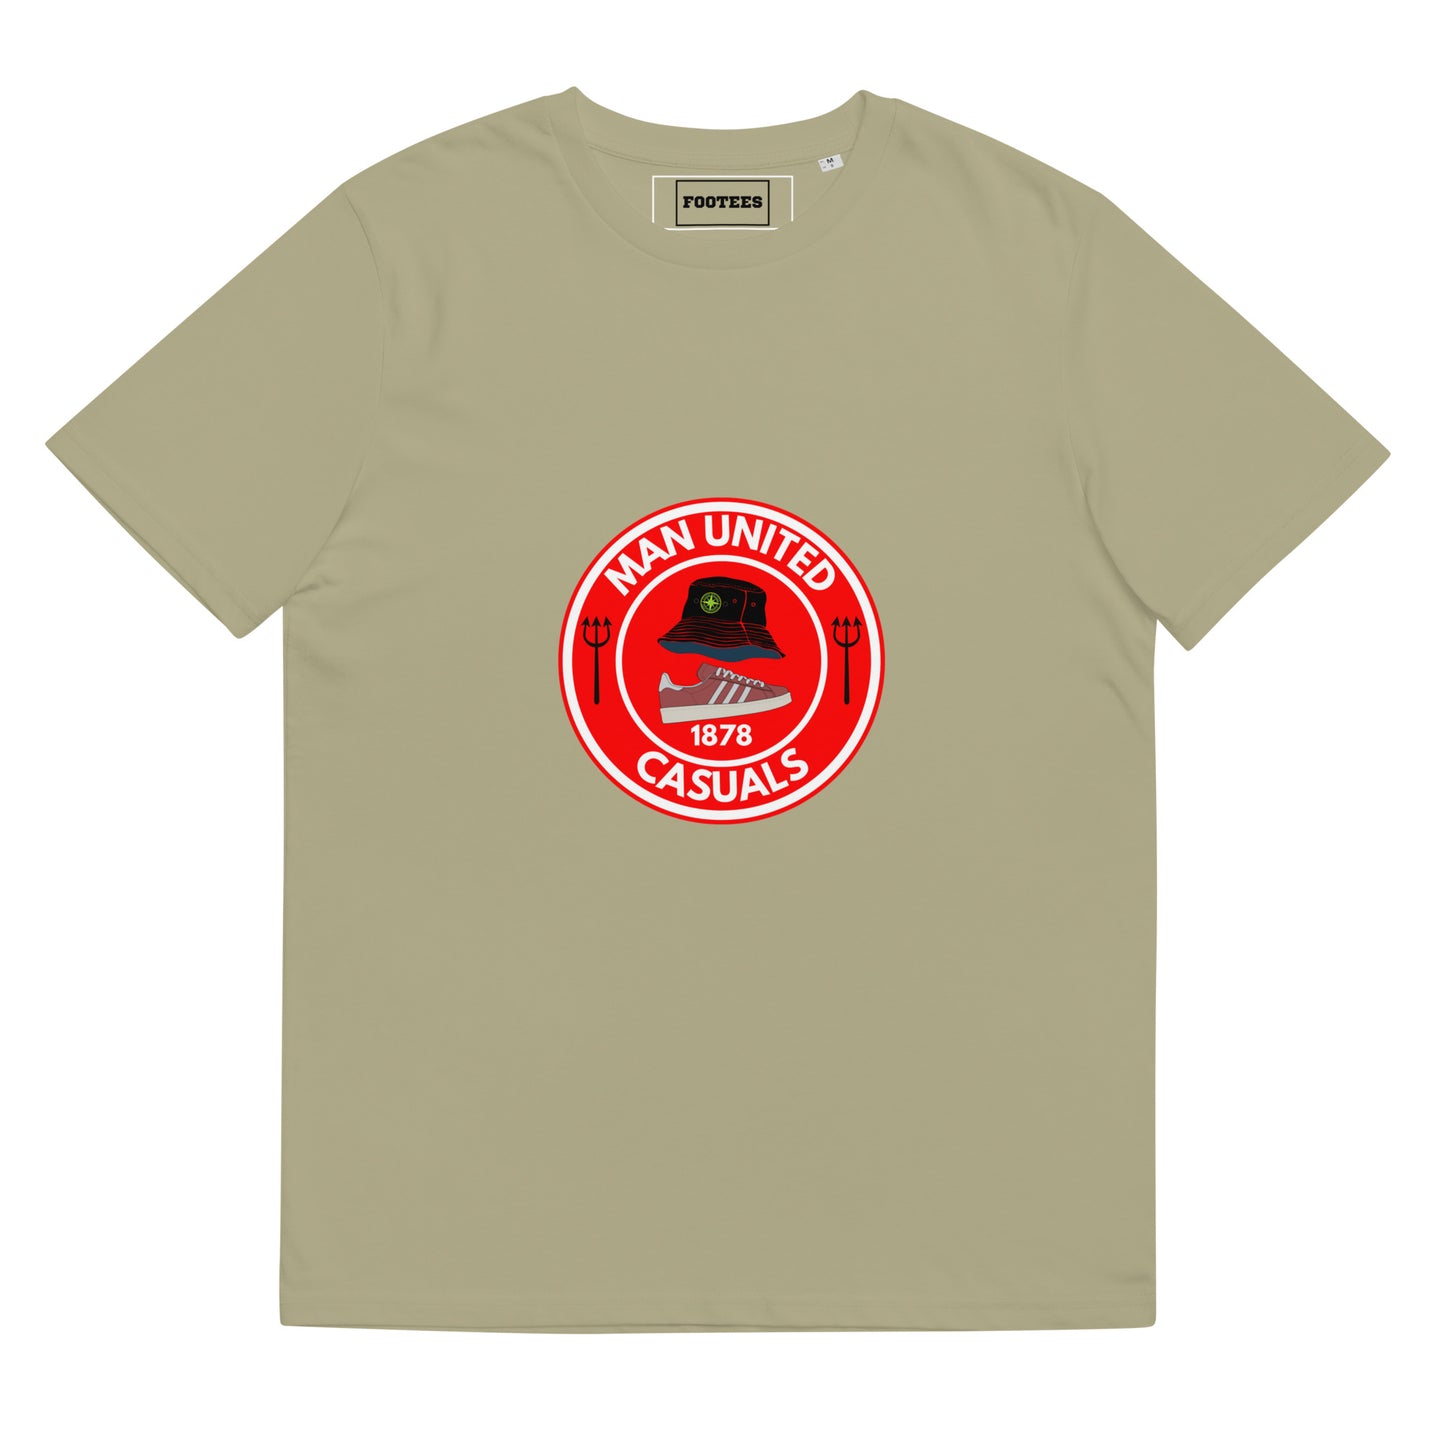 Man United Casuals Tee